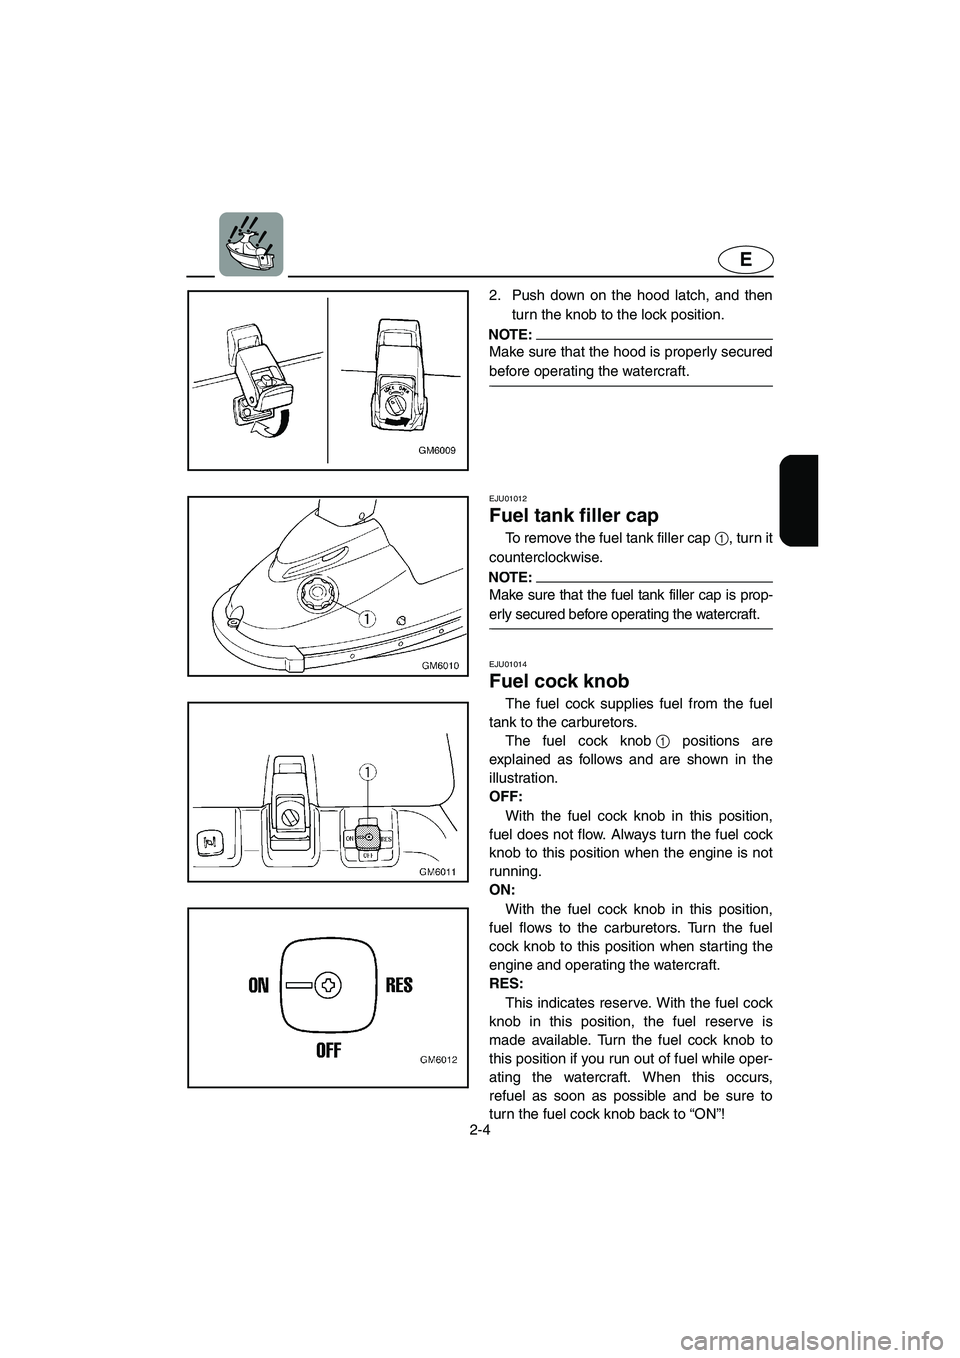 YAMAHA SUPERJET 2002  Owners Manual 2-4
E
2. Push down on the hood latch, and then
turn the knob to the lock position. 
NOTE:@ Make sure that the hood is properly secured
before operating the watercraft. 
@
EJU01012 
Fuel tank filler ca